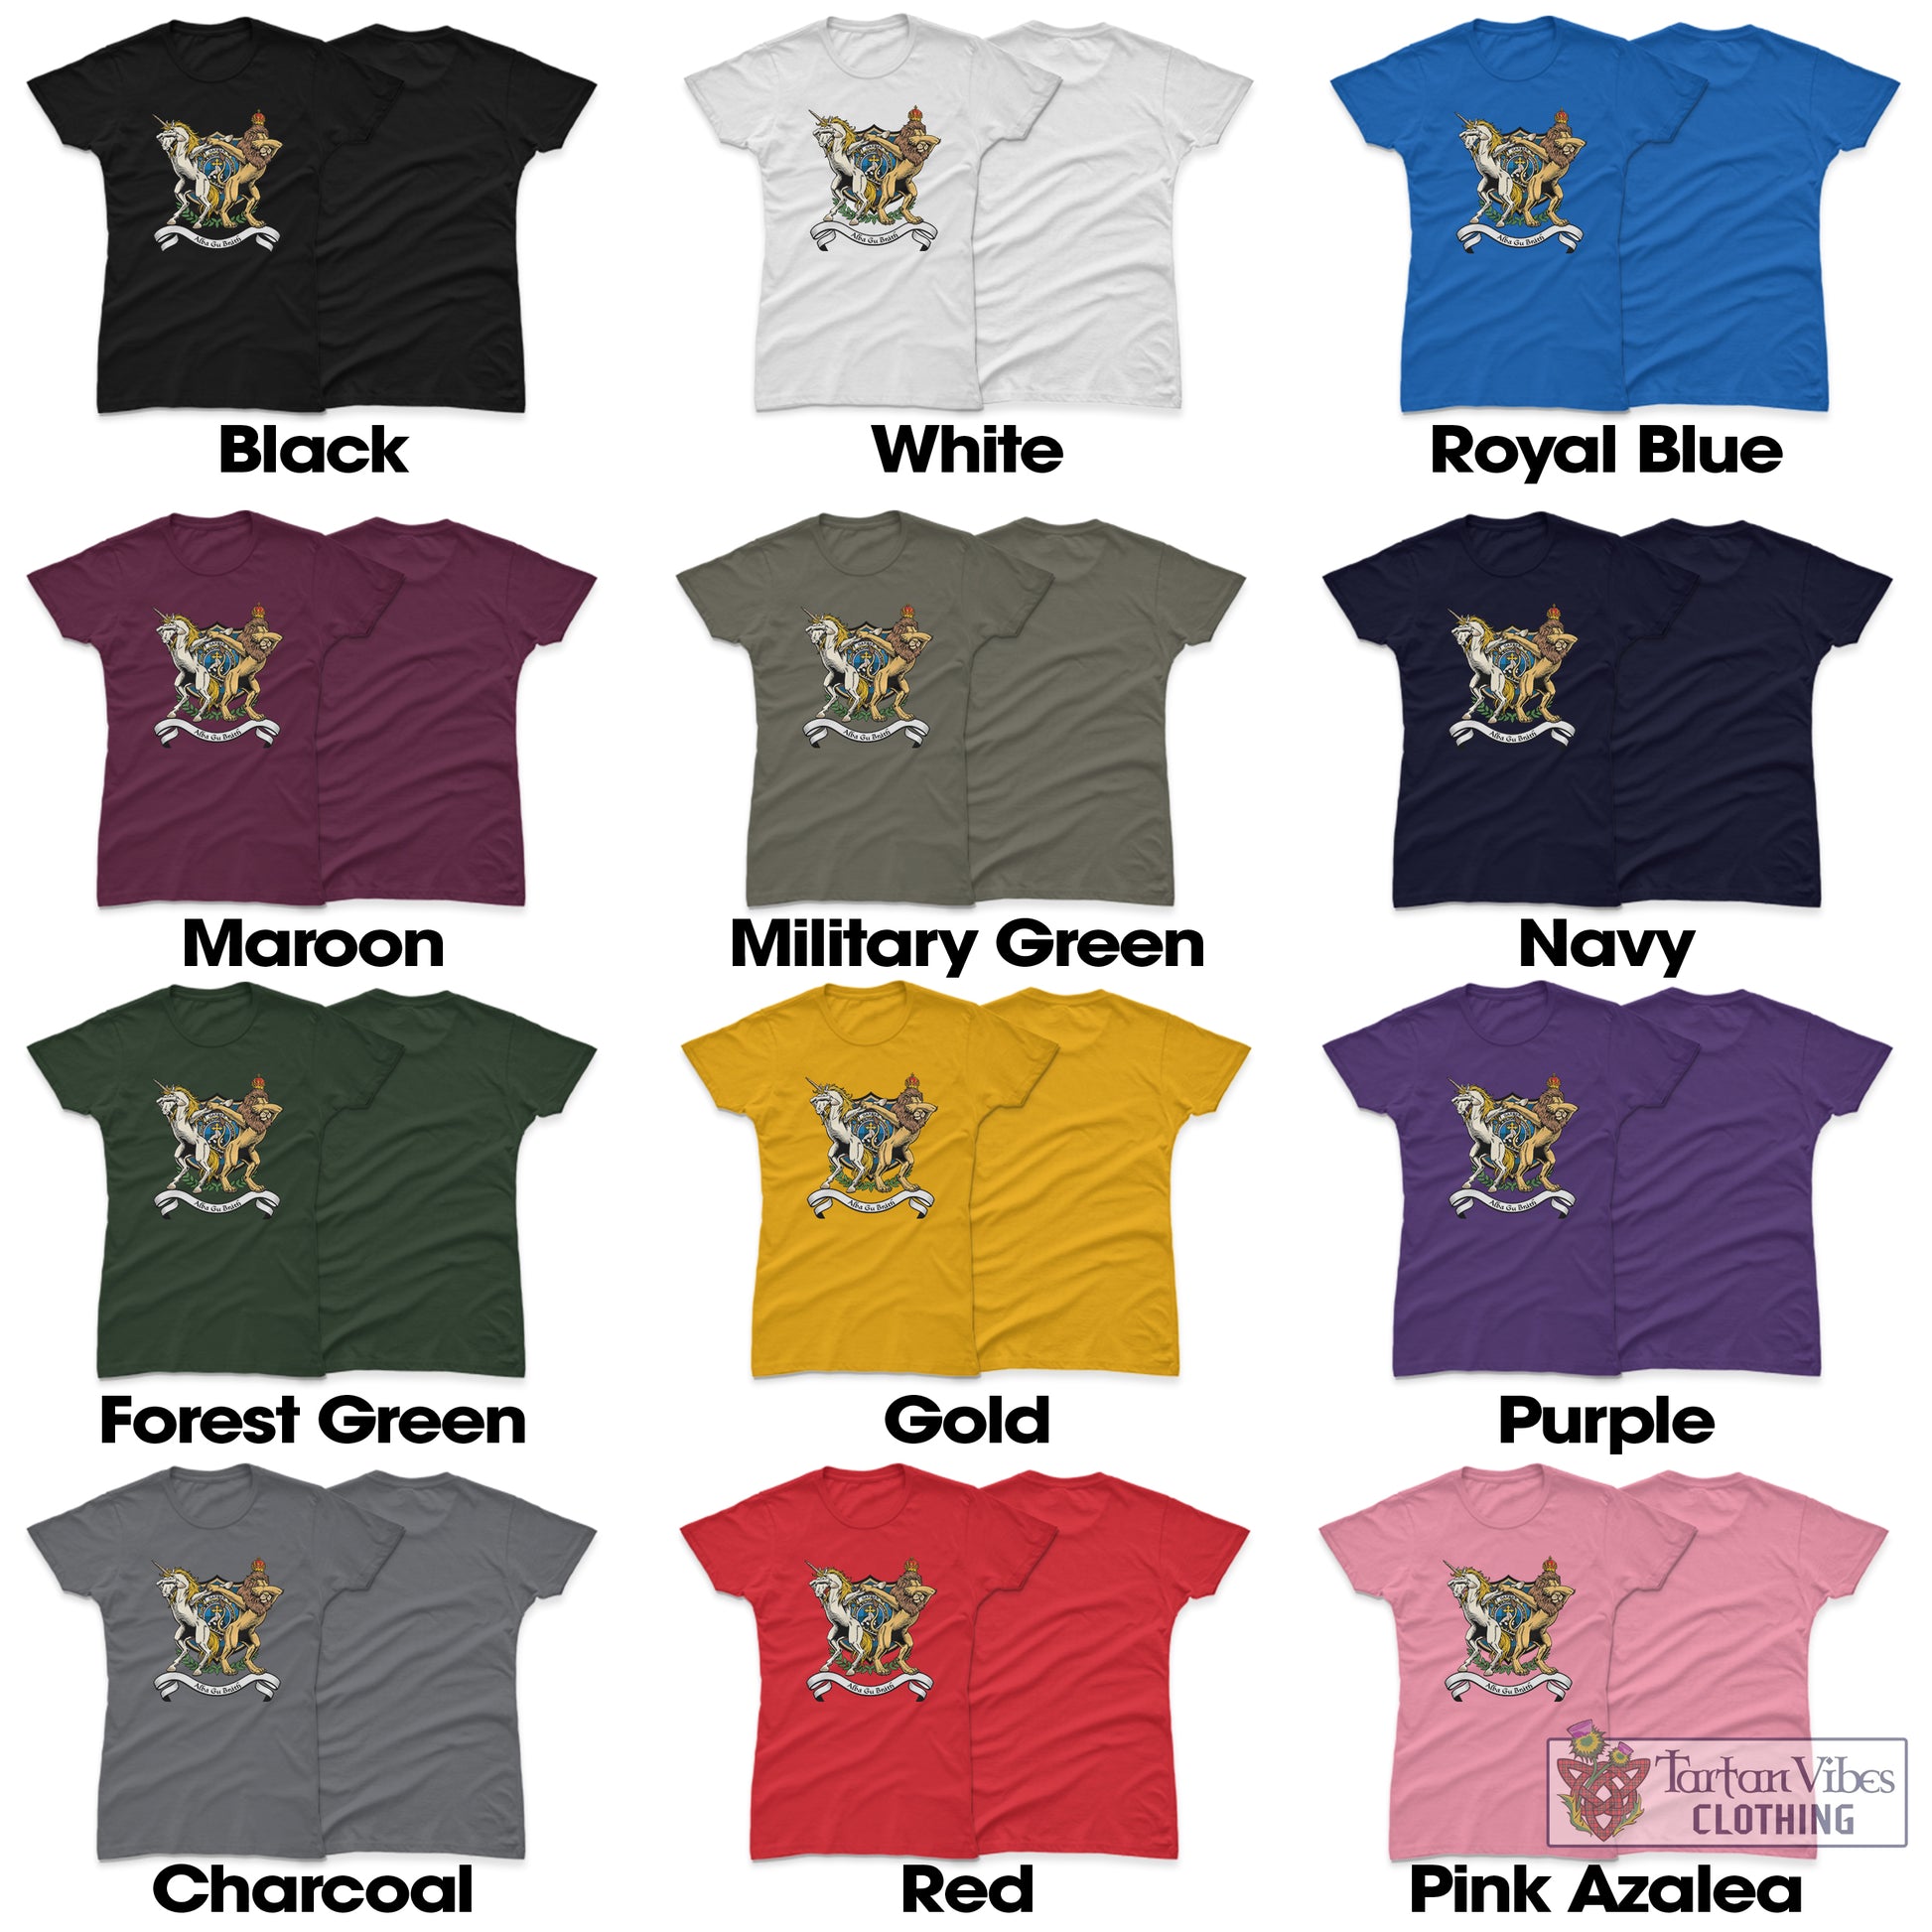 Tartan Vibes Clothing Garden Family Crest Cotton Women's T-Shirt with Scotland Royal Coat Of Arm Funny Style